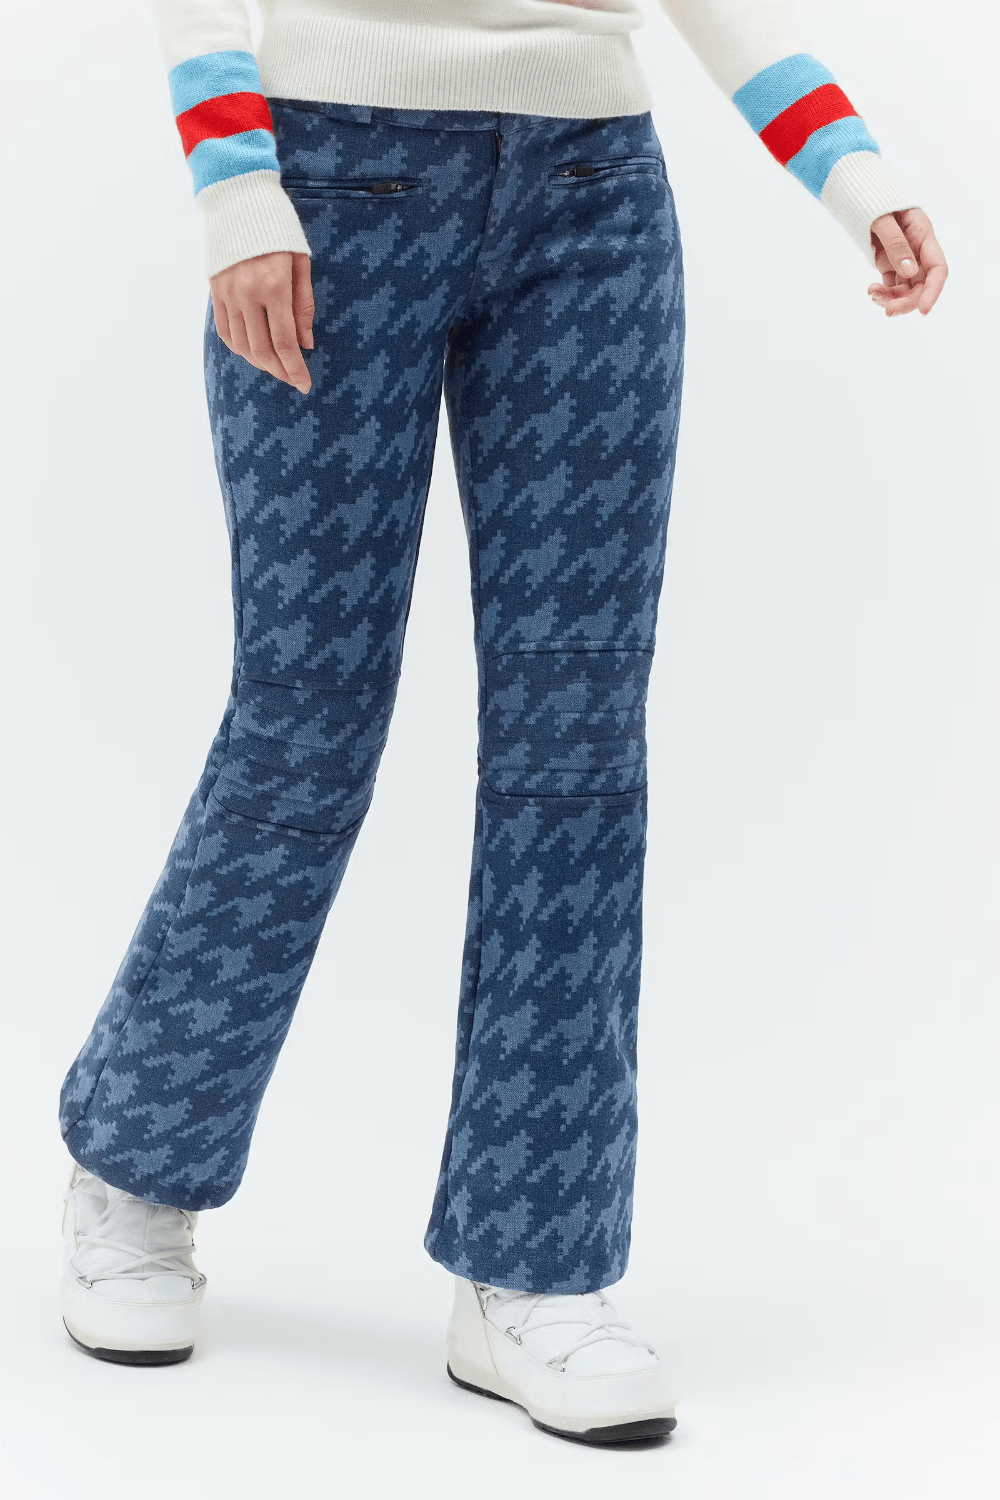 Perfect Moment X Dl1961 Auroral Houndstooth Denim Flared Ski Pants in Blue  for Men